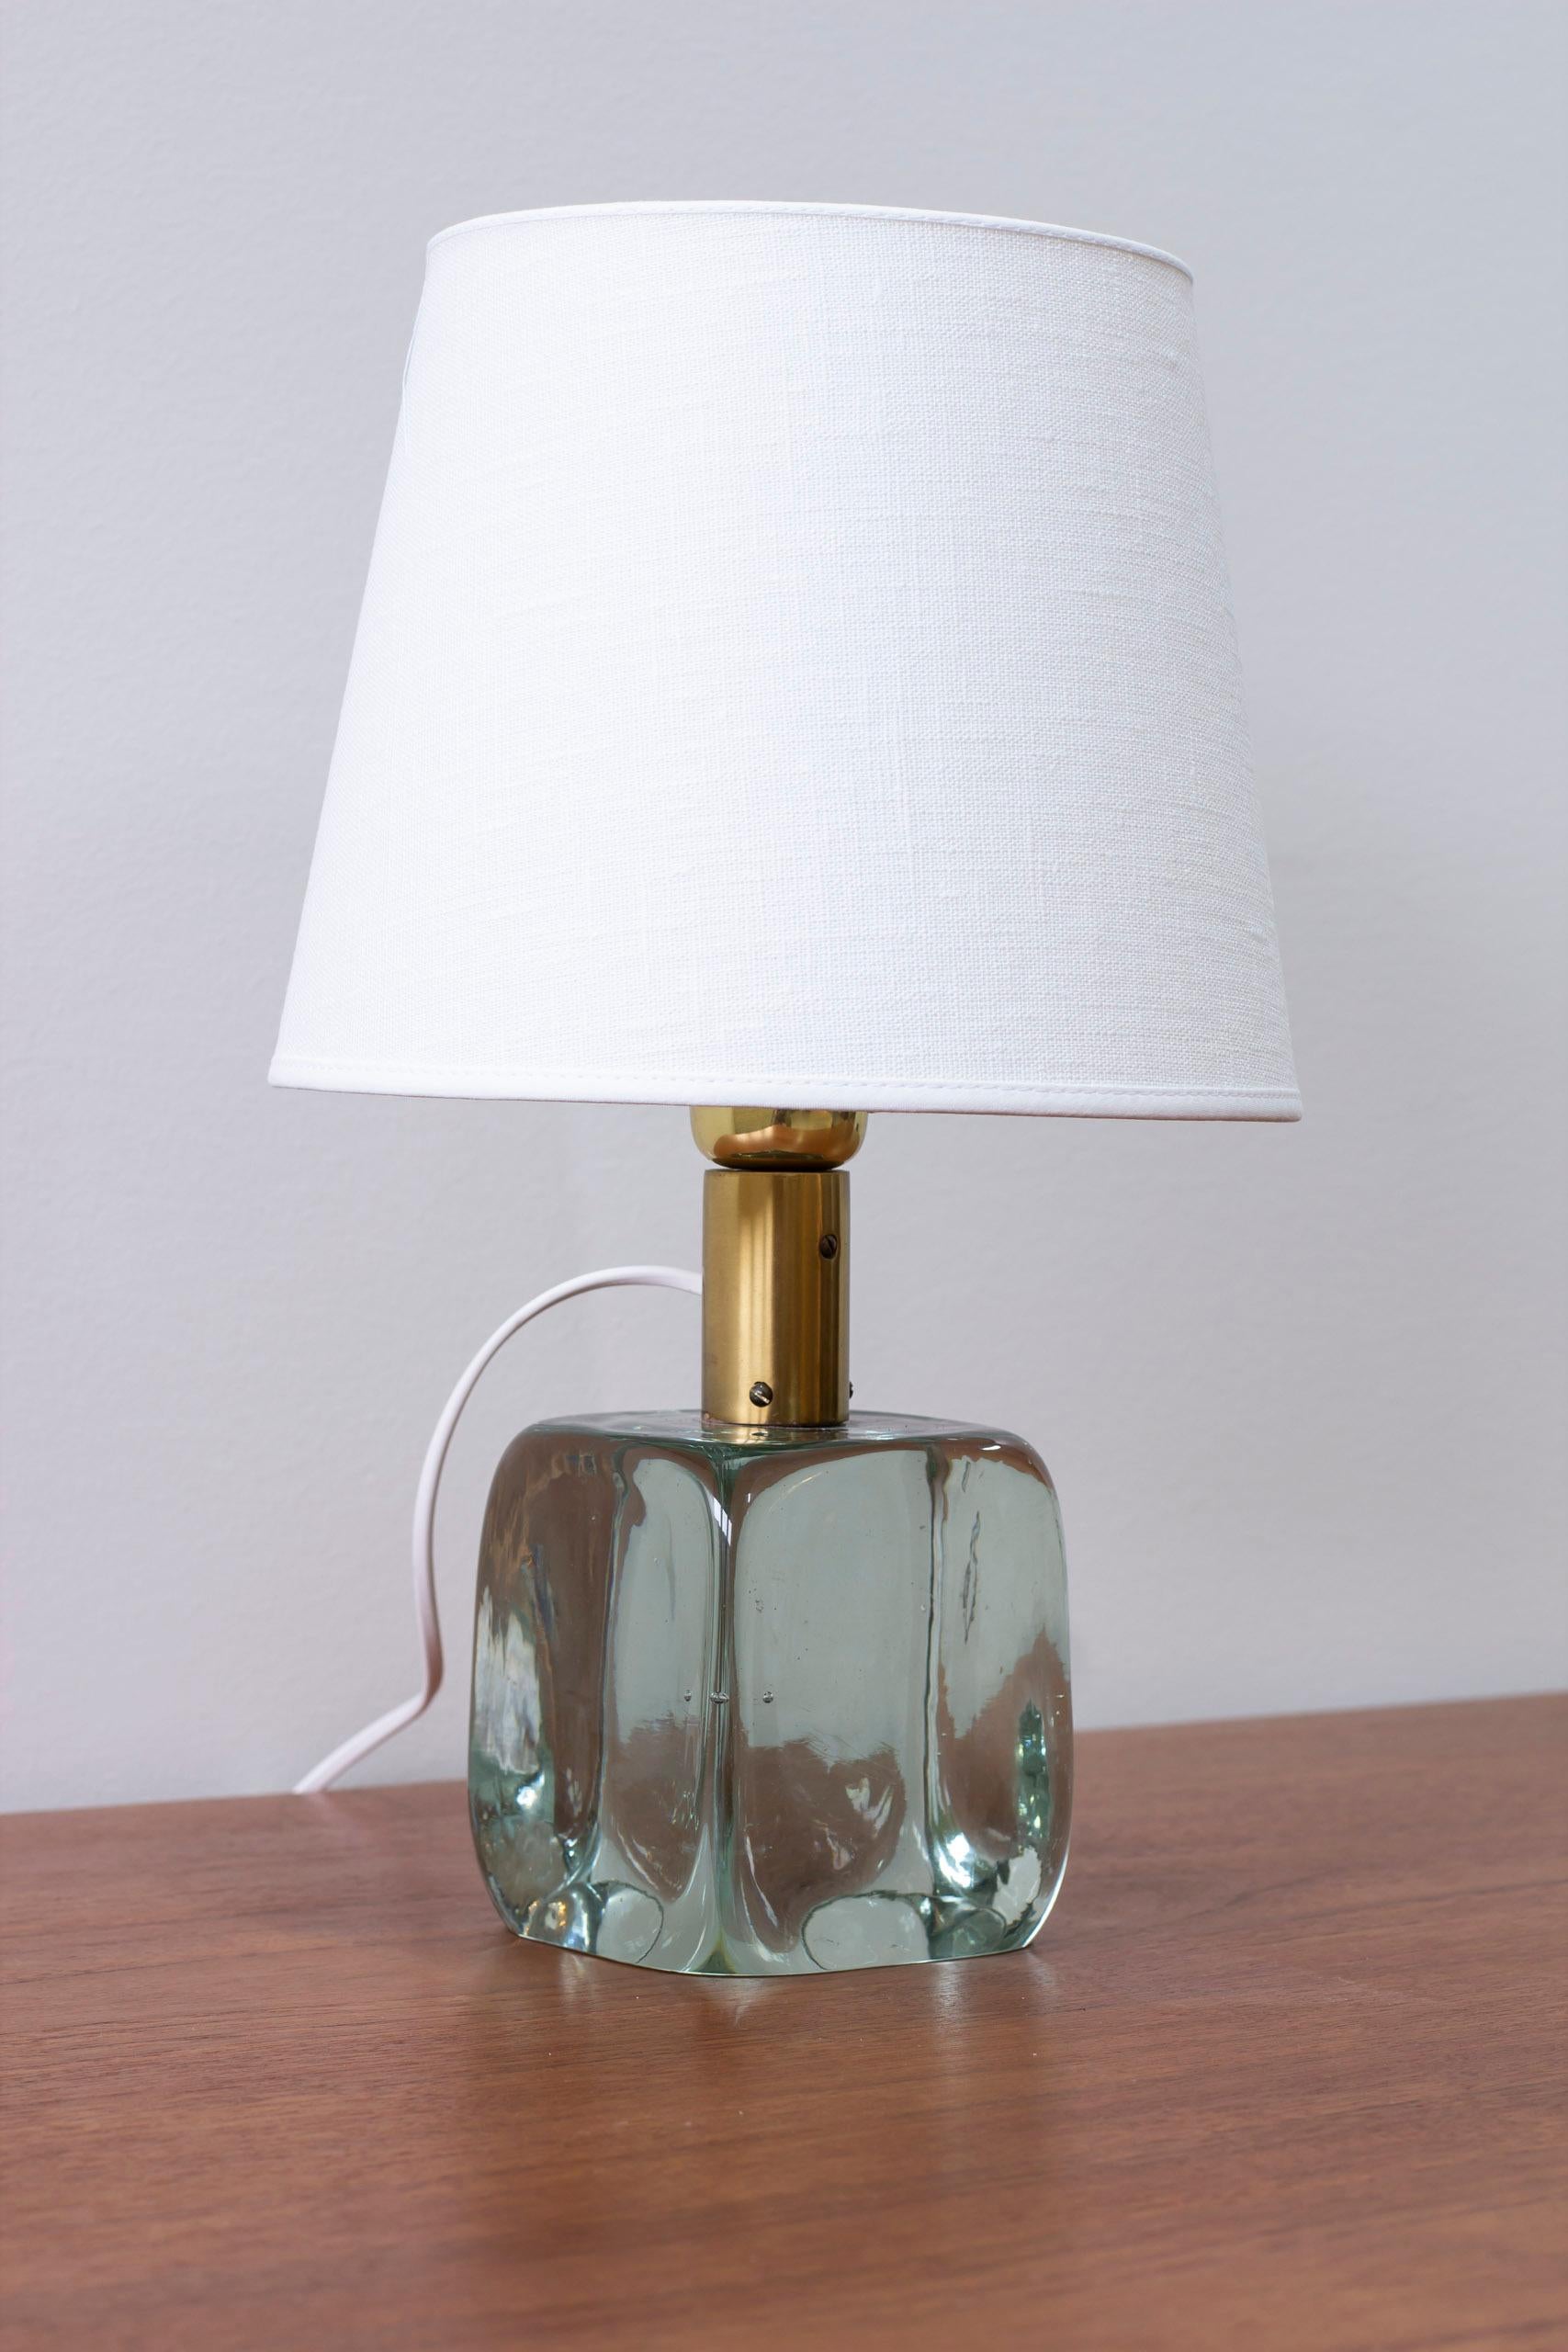 Table lamp model 1819 designed by Josef Frank. Produced in Sweden by Svenskt Tenn, the glass mold blown by Reijmyre. Thick mold blown clear glass and brass. Light switch on the lamp holder in working order. Very good vintage condition with few signs